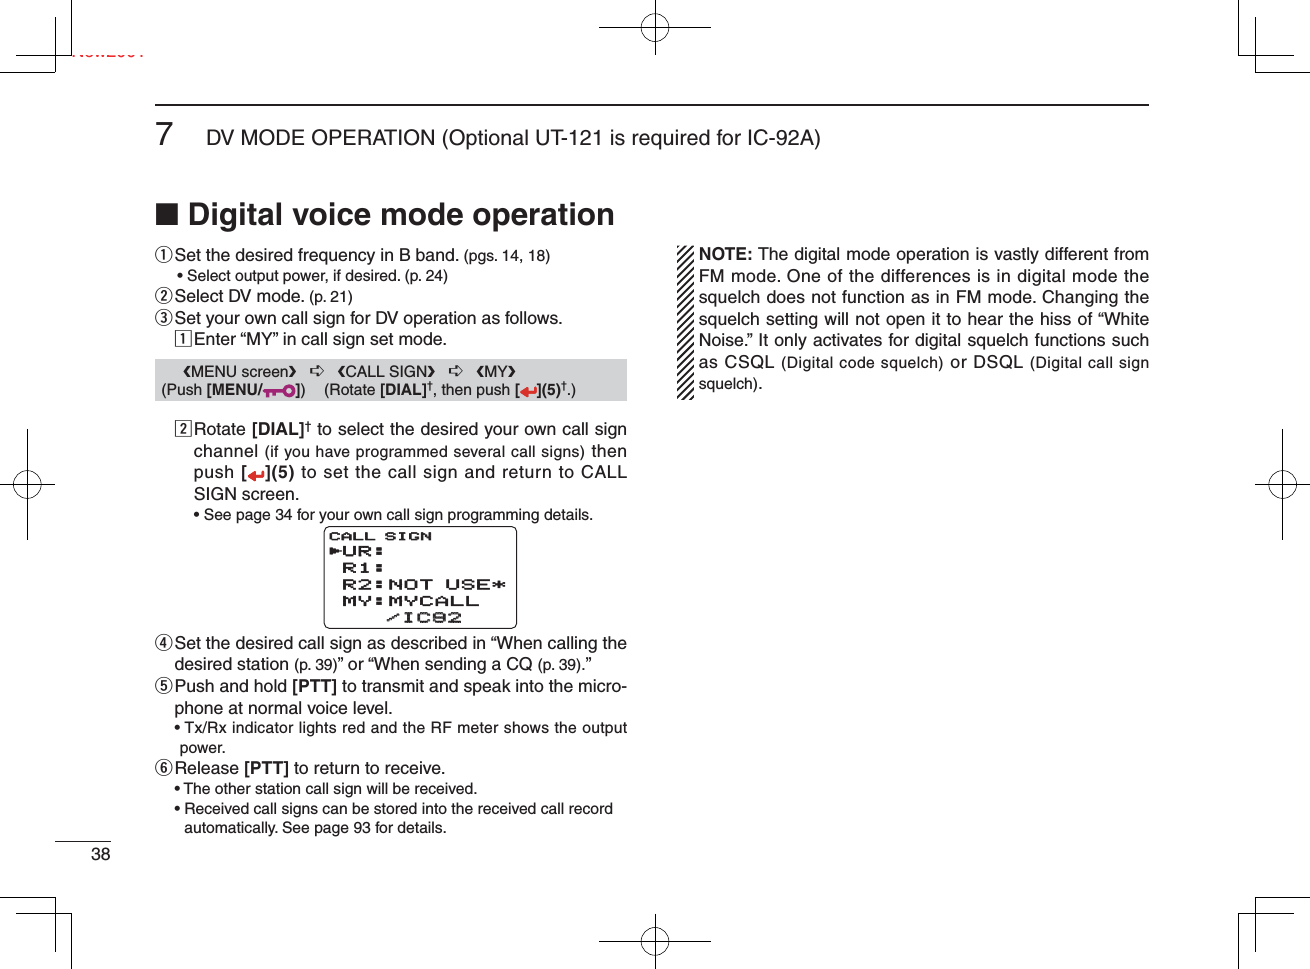 Ne387DV MODE OPERATION (Optional UT-121 is required for IC-92A)New2001■ Digital voice mode operationq  Set the desired frequency in B band. (pgs. 14, 18)  • Select output power, if desired. (p. 24)w Select DV mode. (p. 21)e Set your own call sign for DV operation as follows.z Enter “MY” in call sign set mode.x  Rotate [DIAL]† to select the desired your own call sign channel (if you have programmed several call signs) then push [](5) to set the call sign and return to CALL SIGN screen.  • See page 34 for your own call sign programming details.r  Set the desired call sign as described in “When calling the desired station (p. 39)” or “When sending a CQ (p. 39).” t  Push and hold [PTT] to transmit and speak into the micro-phone at normal voice level. •  Tx/Rx indicator lights red and the RF meter shows the output power.y Release  [PTT] to return to receive.  • The other station call sign will be received. •  Received call signs can be stored into the received call record automatically. See page 93 for details.  NOTE: The digital mode operation is vastly different from FM mode. One of the differences is in digital mode the squelch does not function as in FM mode. Changing the squelch setting will not open it to hear the hiss of “White Noise.” It only activates for digital squelch functions such as CSQL (Digital code squelch) or DSQL (Digital call sign squelch).UR:R1:R2:NOT USE*MY:MYCALL    /IC92    /IC92CALL SIGNCALL SIGNr      ❮MENU screen❯   ➪   ❮CALL SIGN❯   ➪   ❮MY❯ (Push [MENU/ ]) (Rotate [DIAL]†, then push [ ](5)†.)